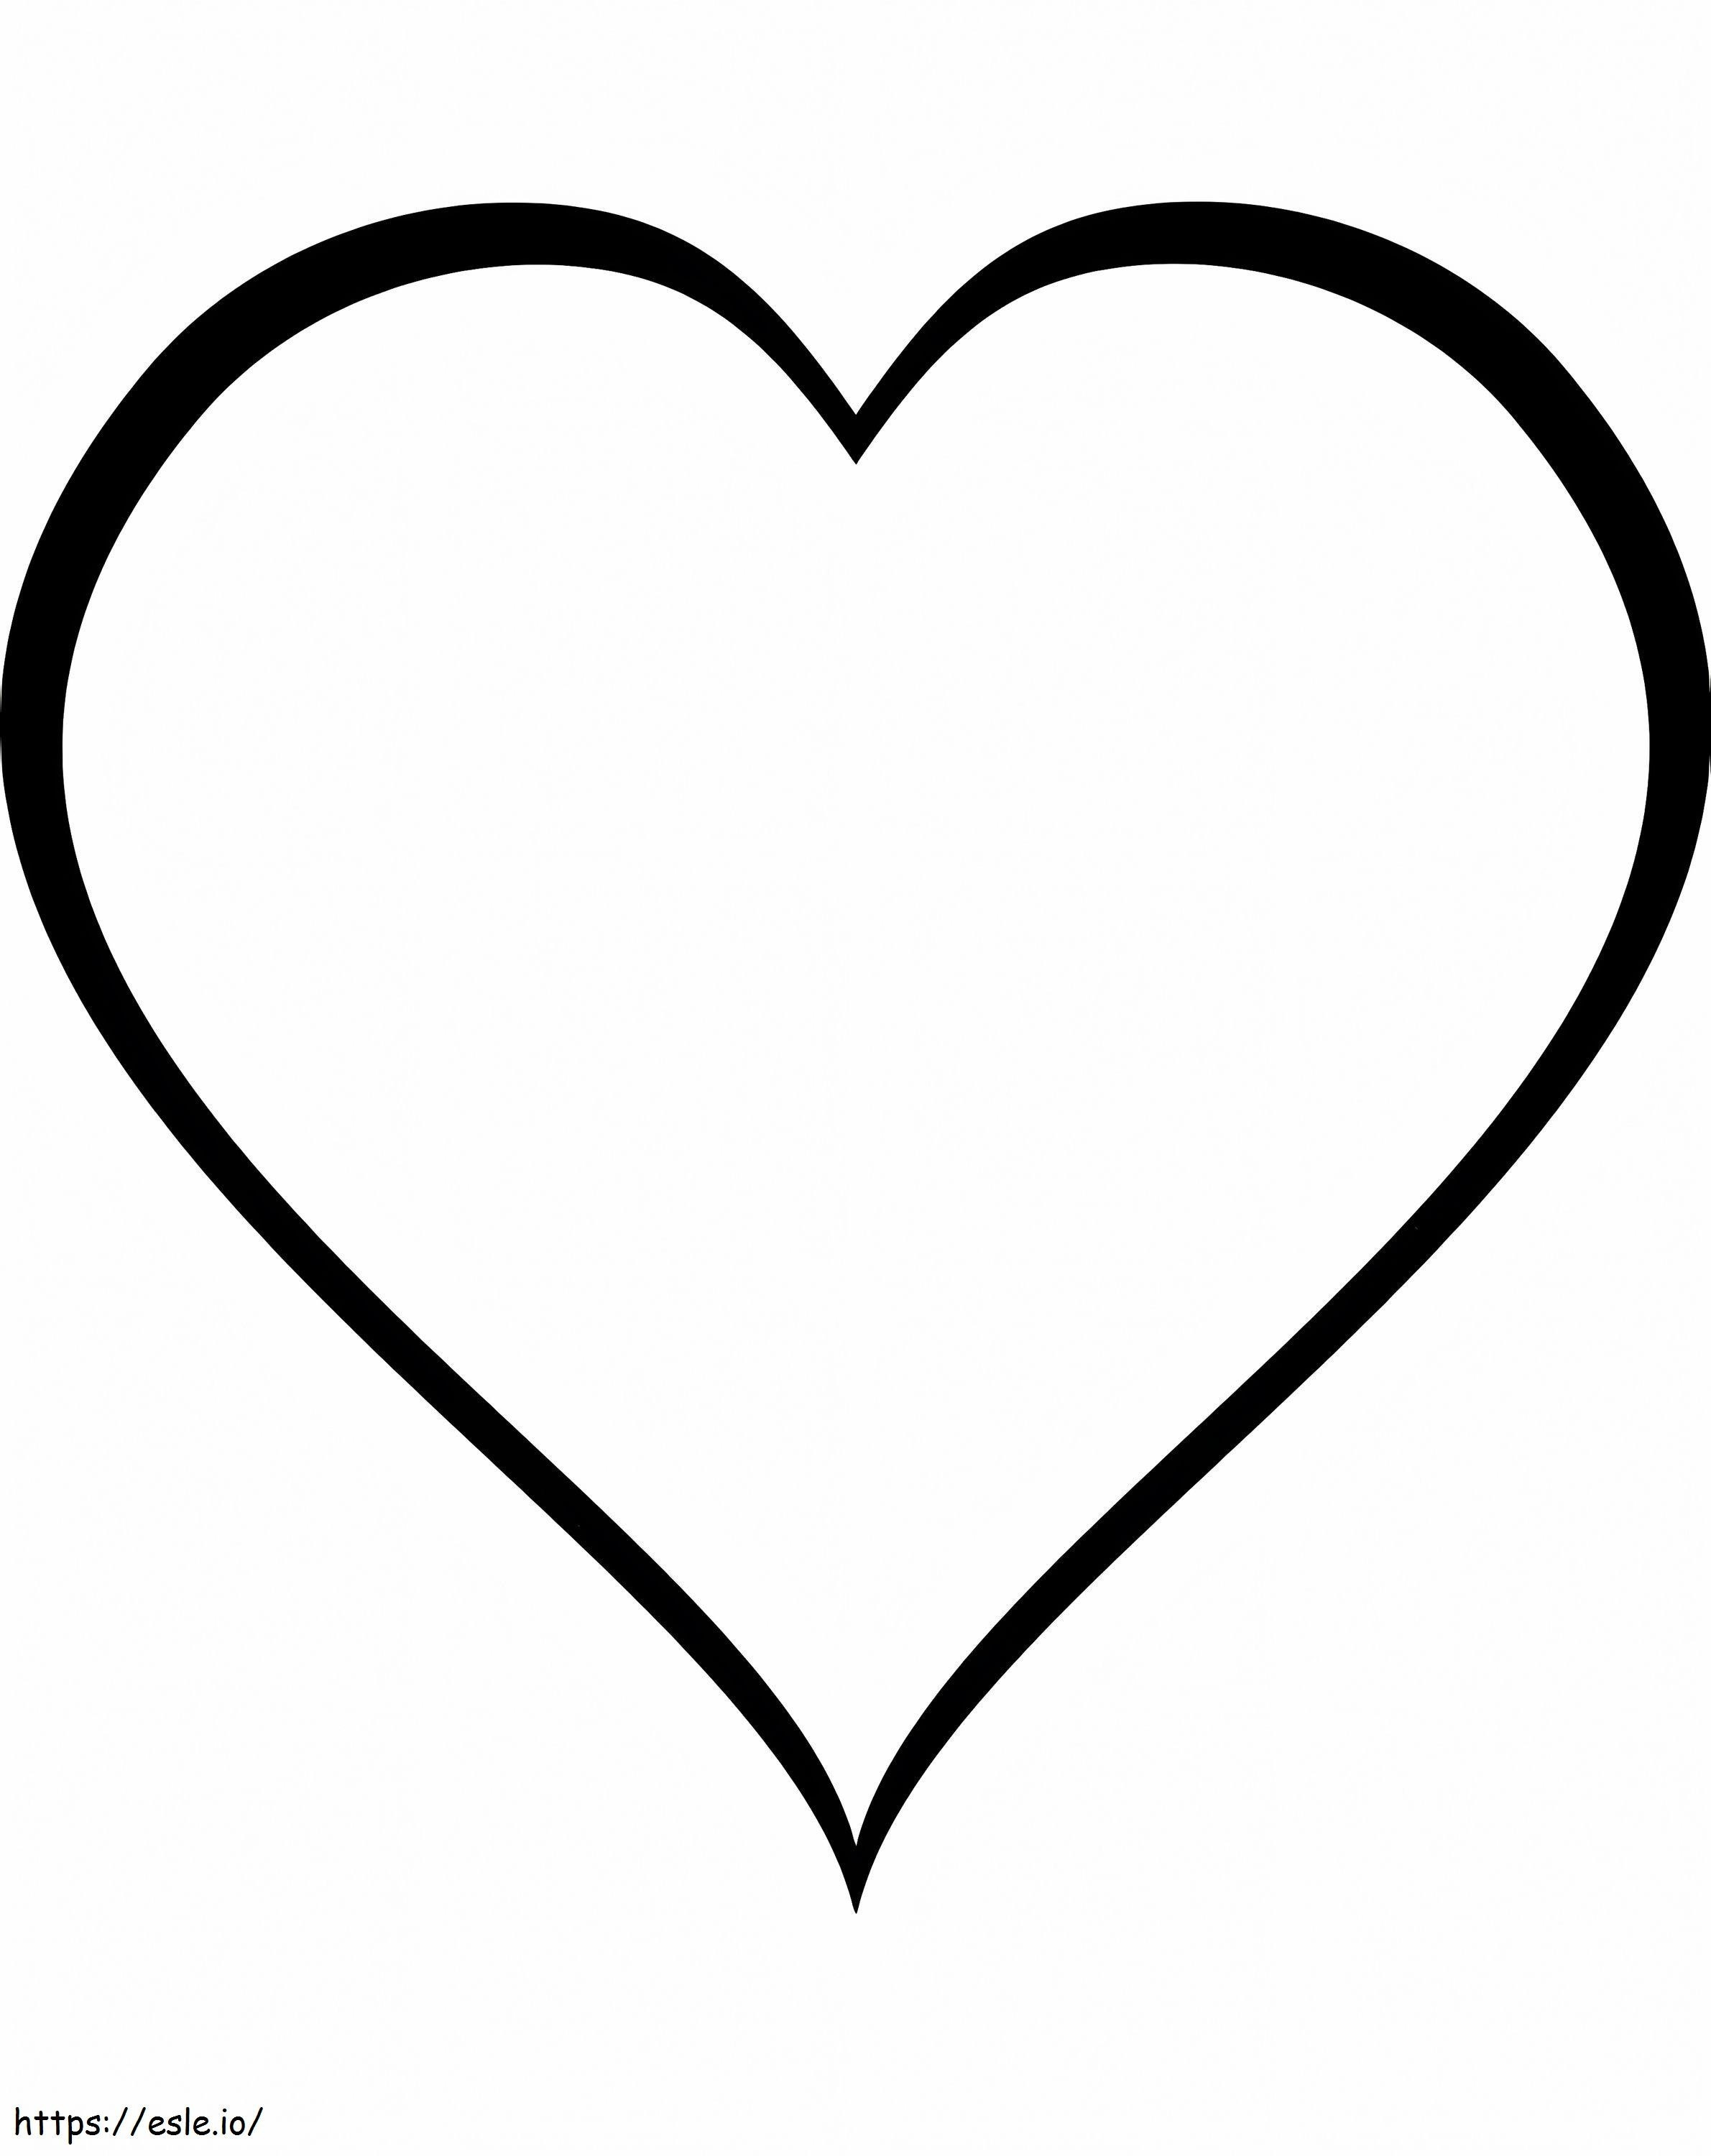 Simple Heart 1 coloring page